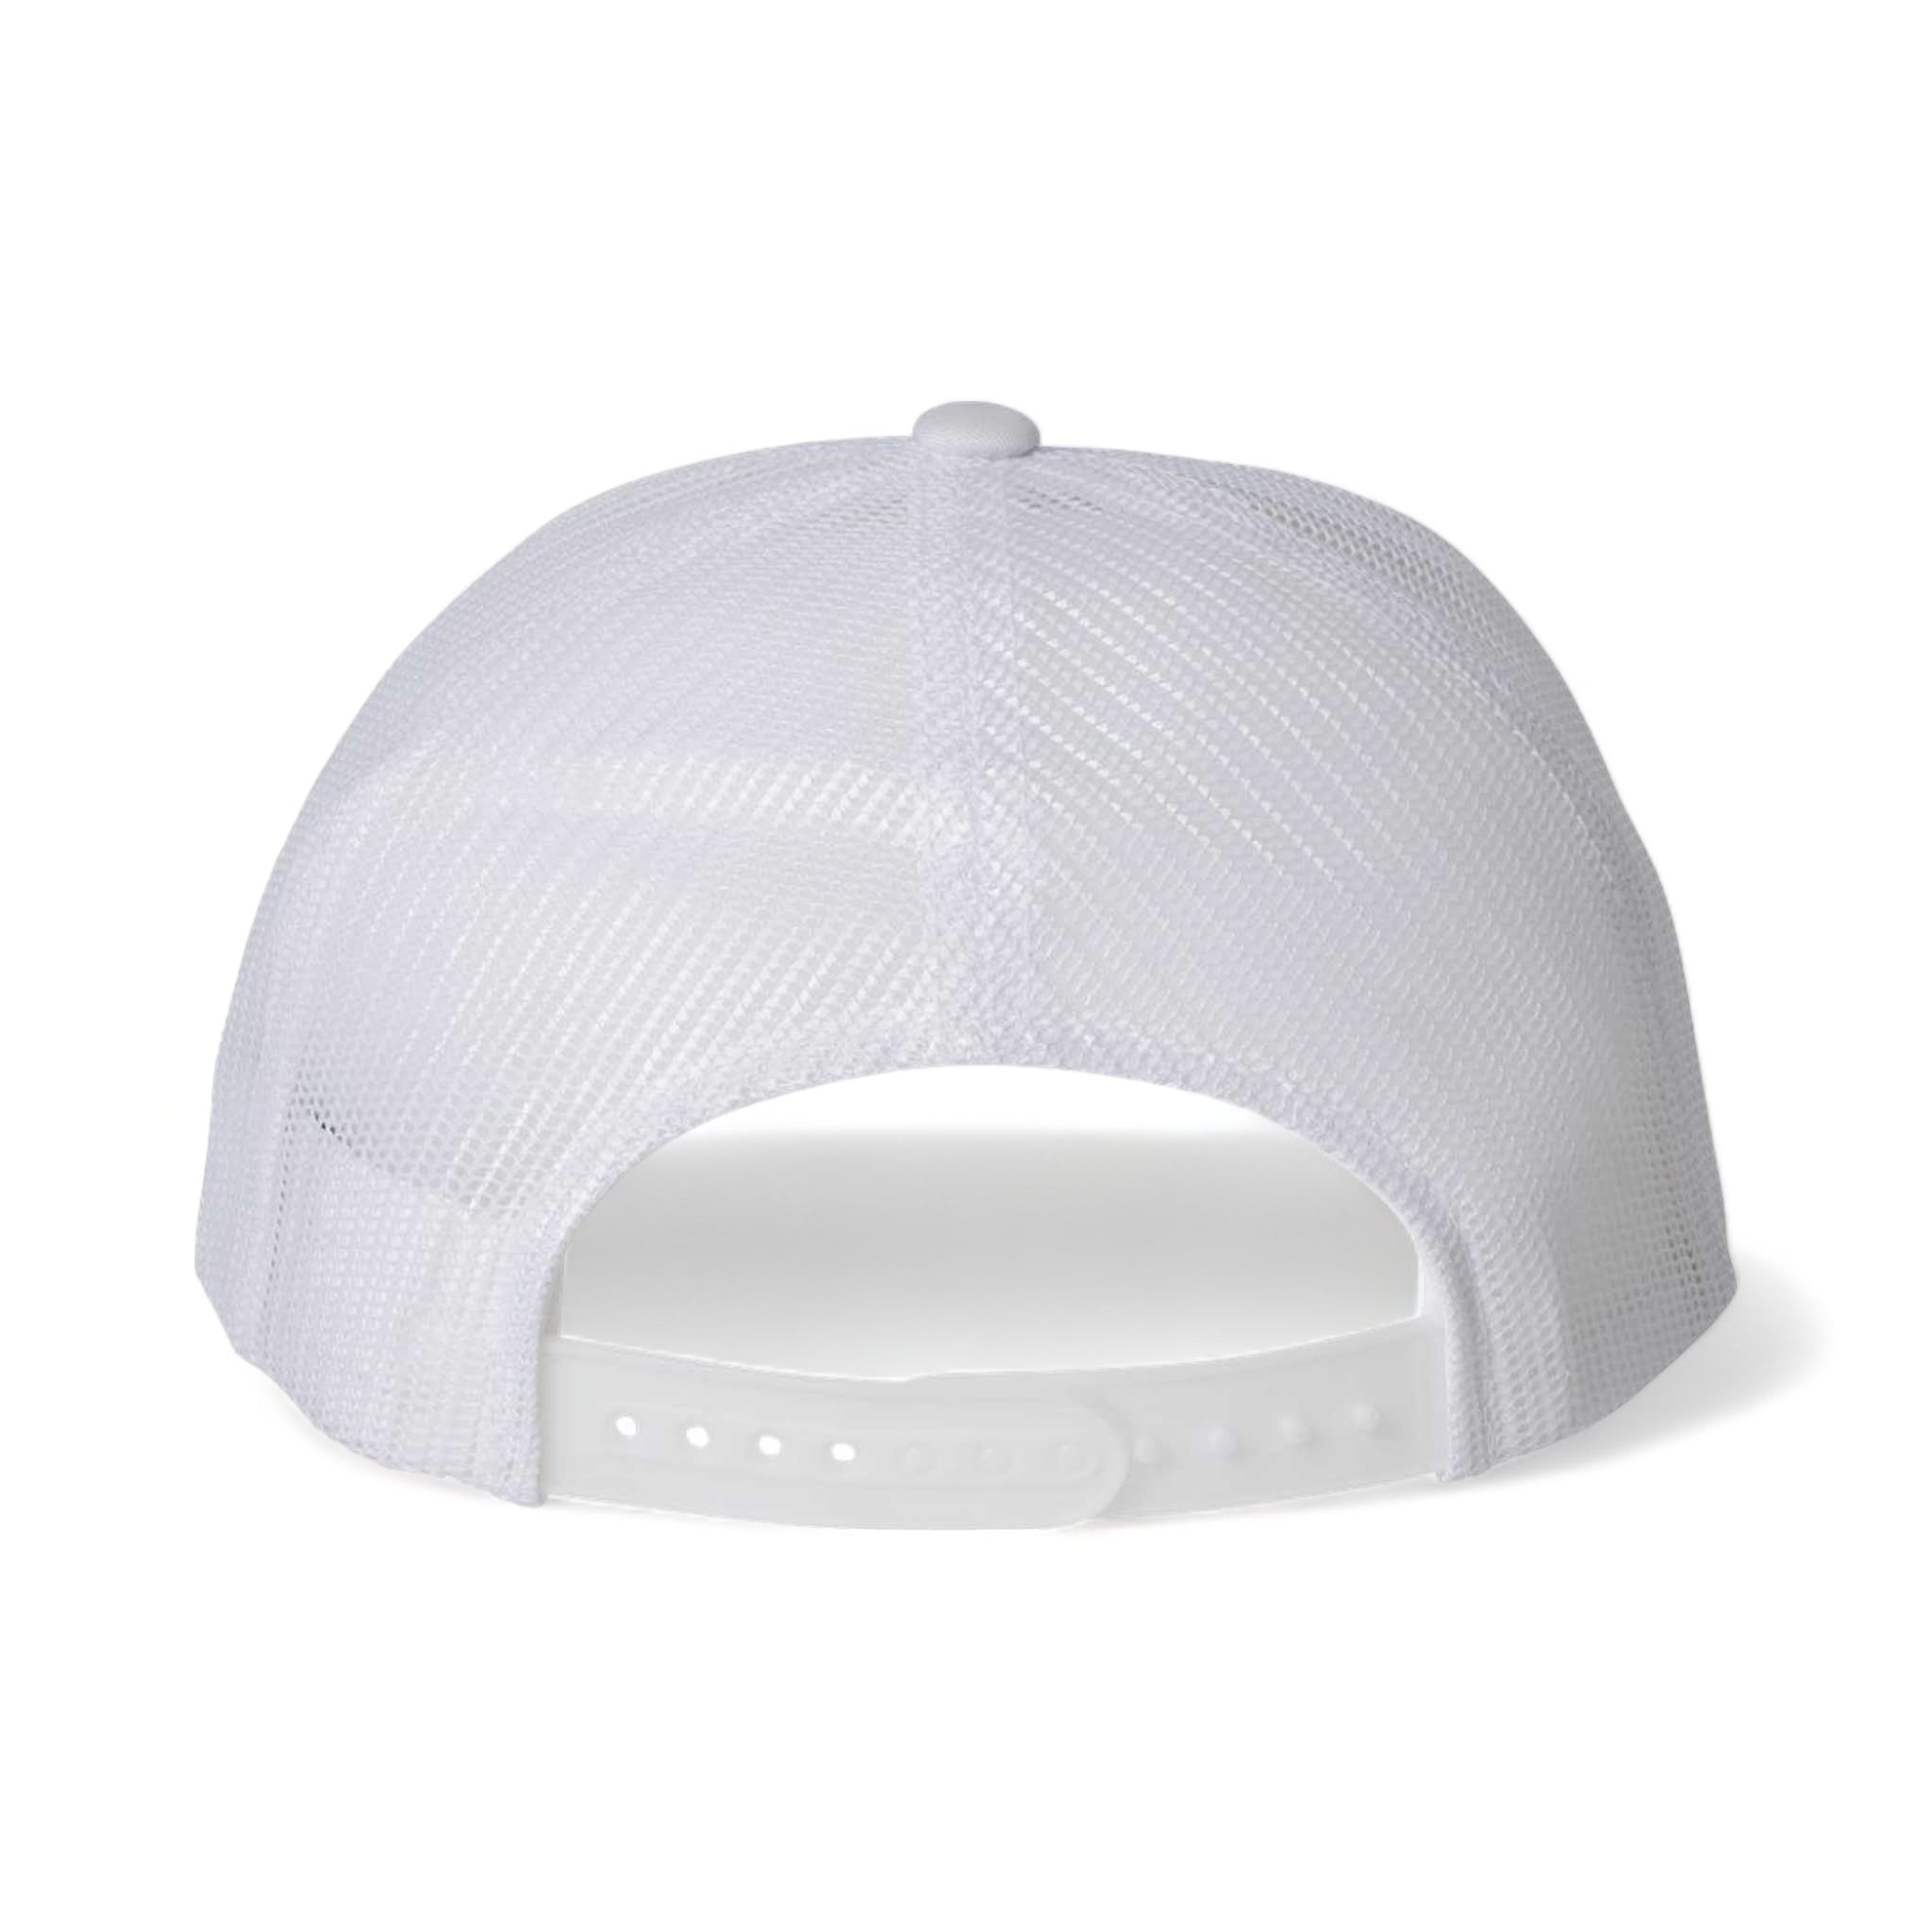 Back view of YP Classics 6606 custom hat in white